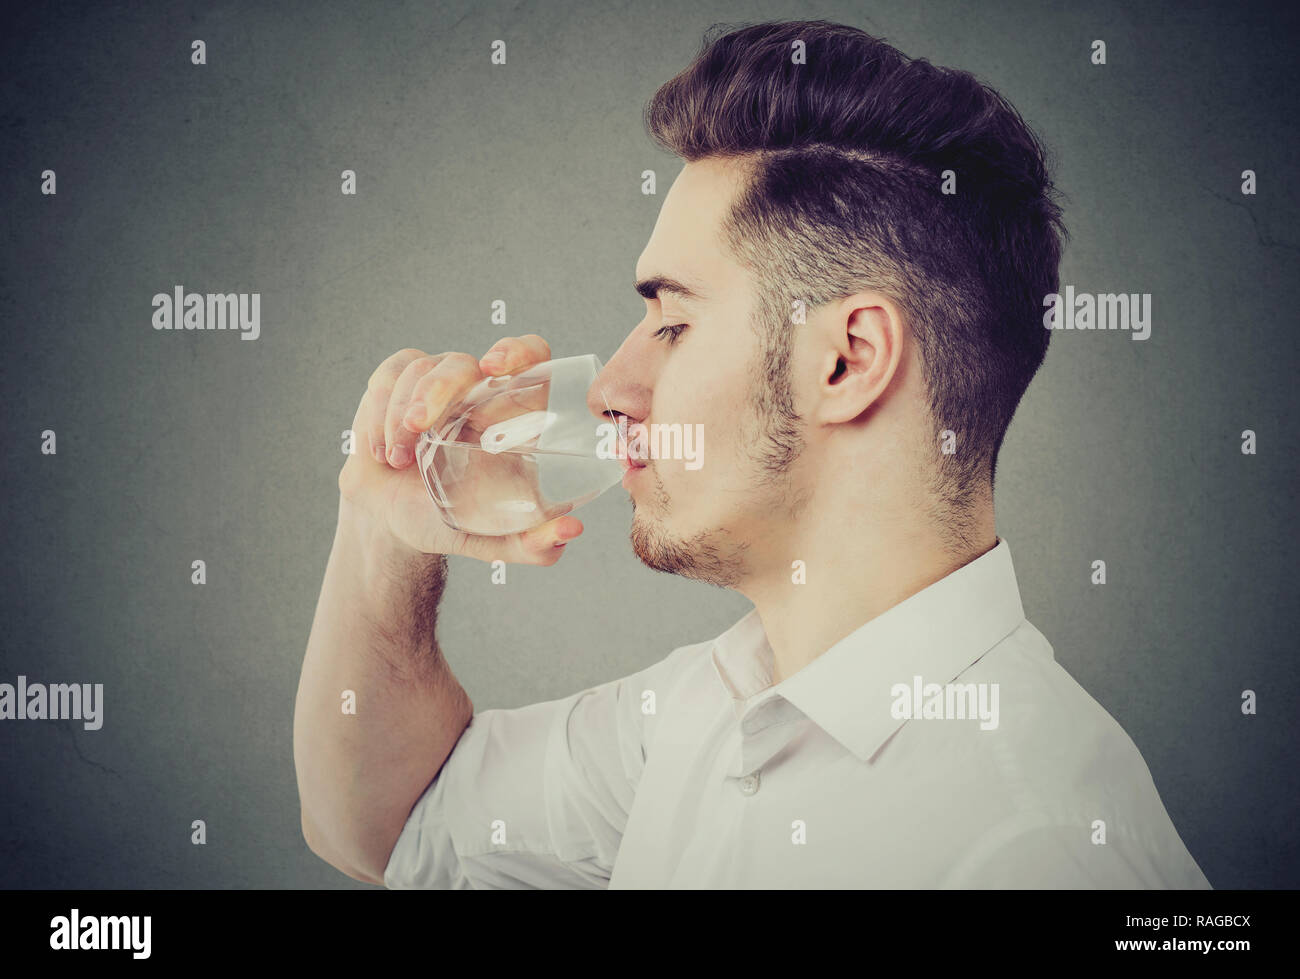 Side view of modern man in white shirt drinking water from glass on gray background Stock Photo